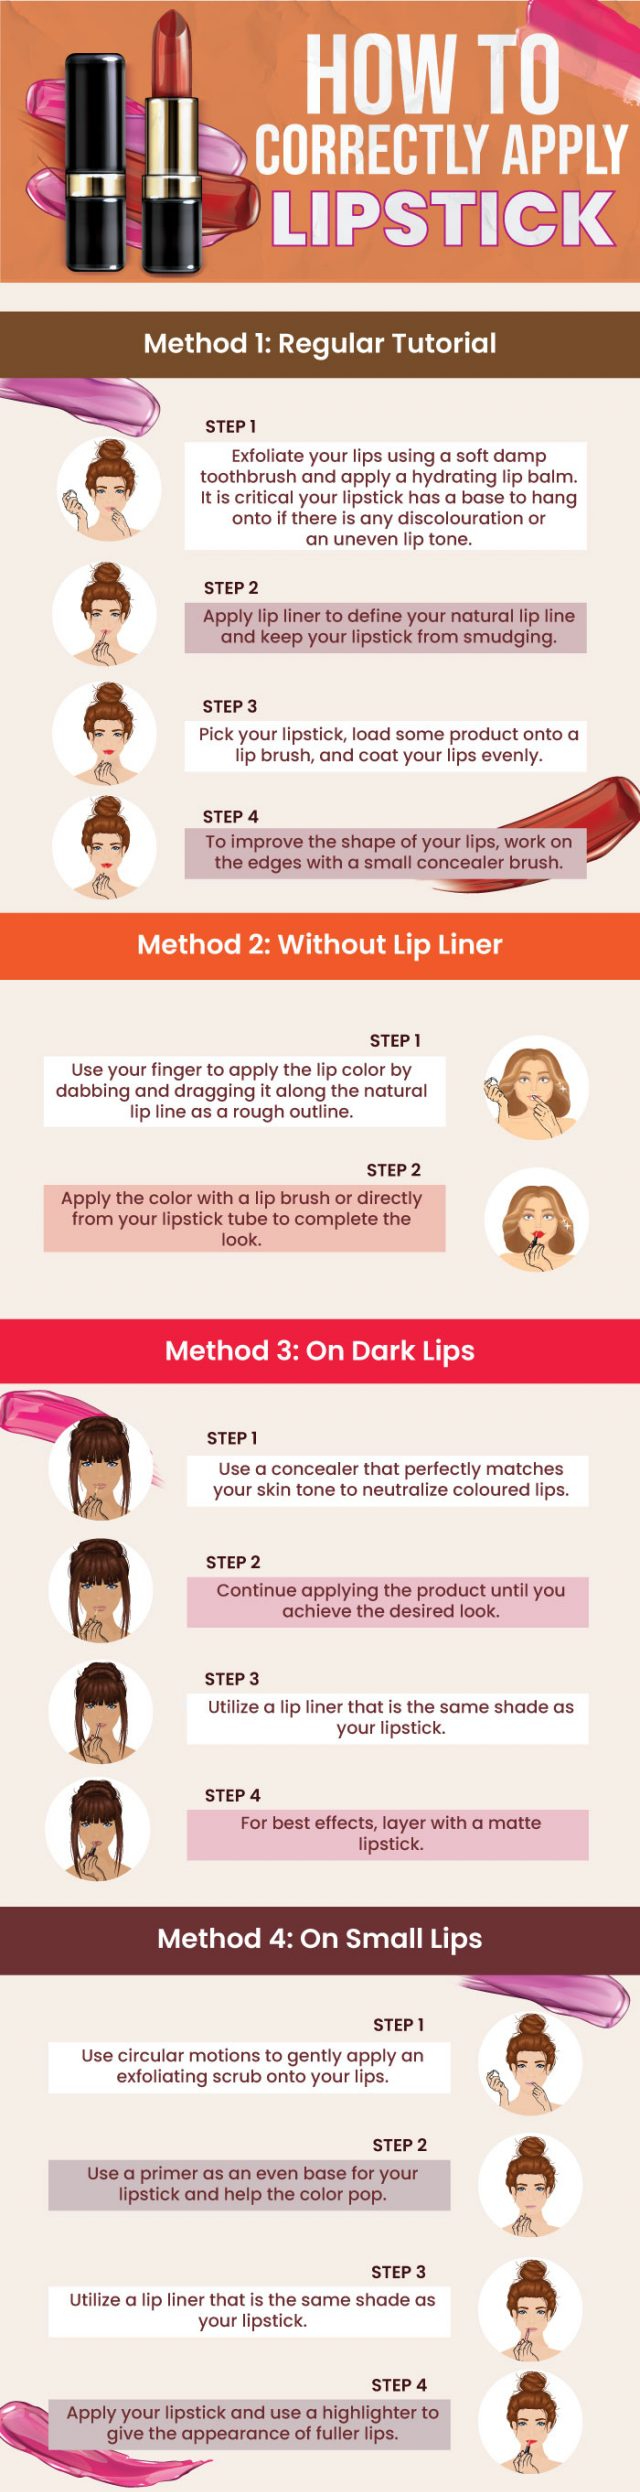 How to properly practice Lipstick 